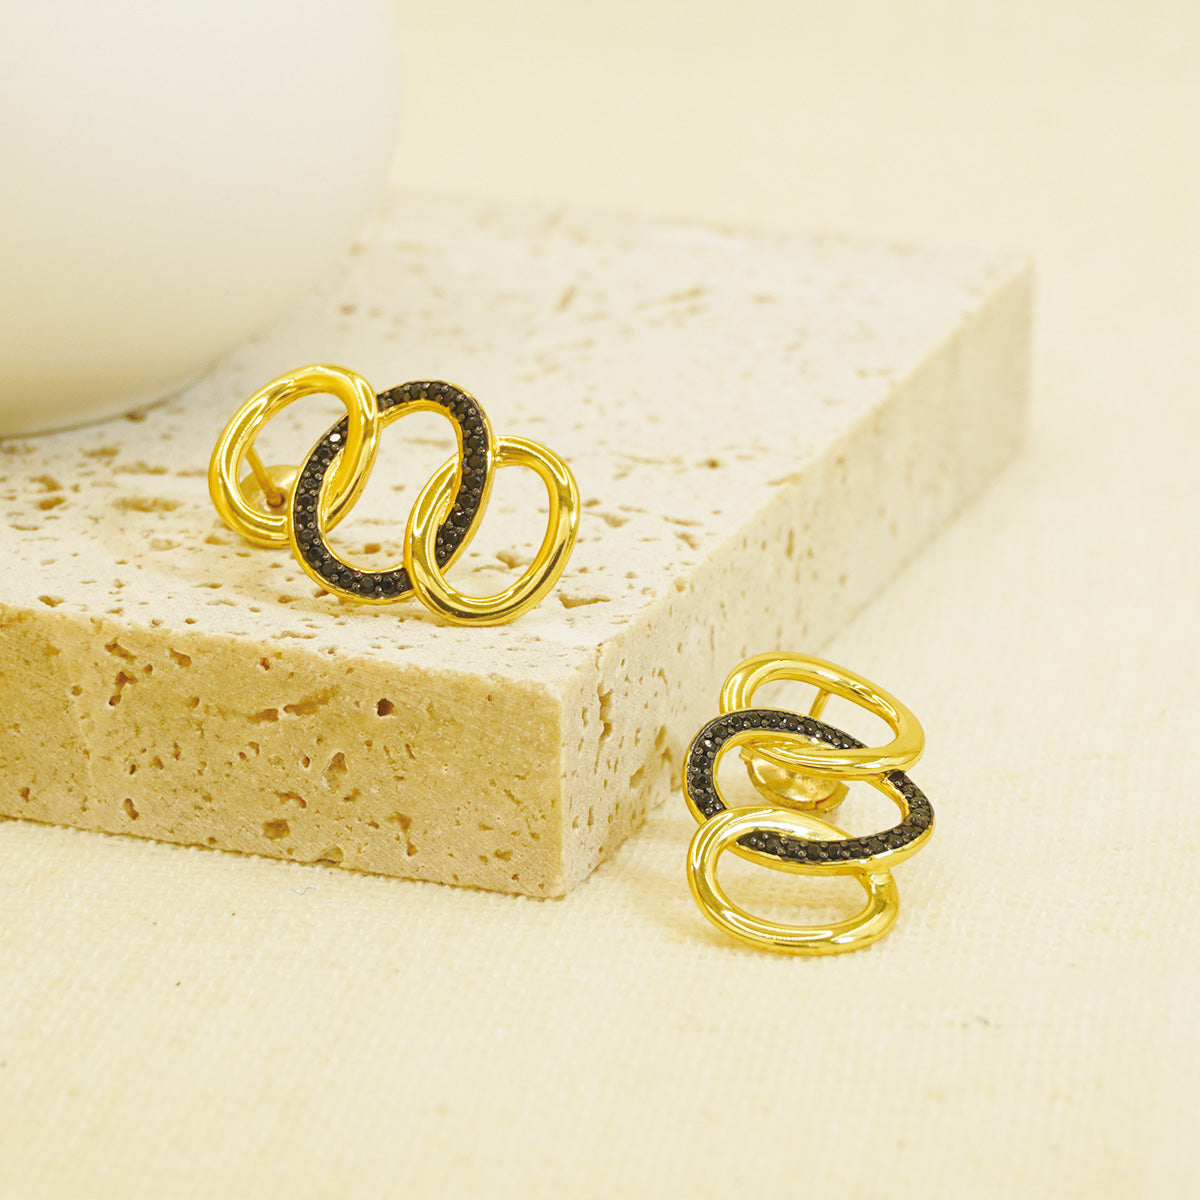 Gold Hammered Triple Hoop Earrings With Black Stones for Women